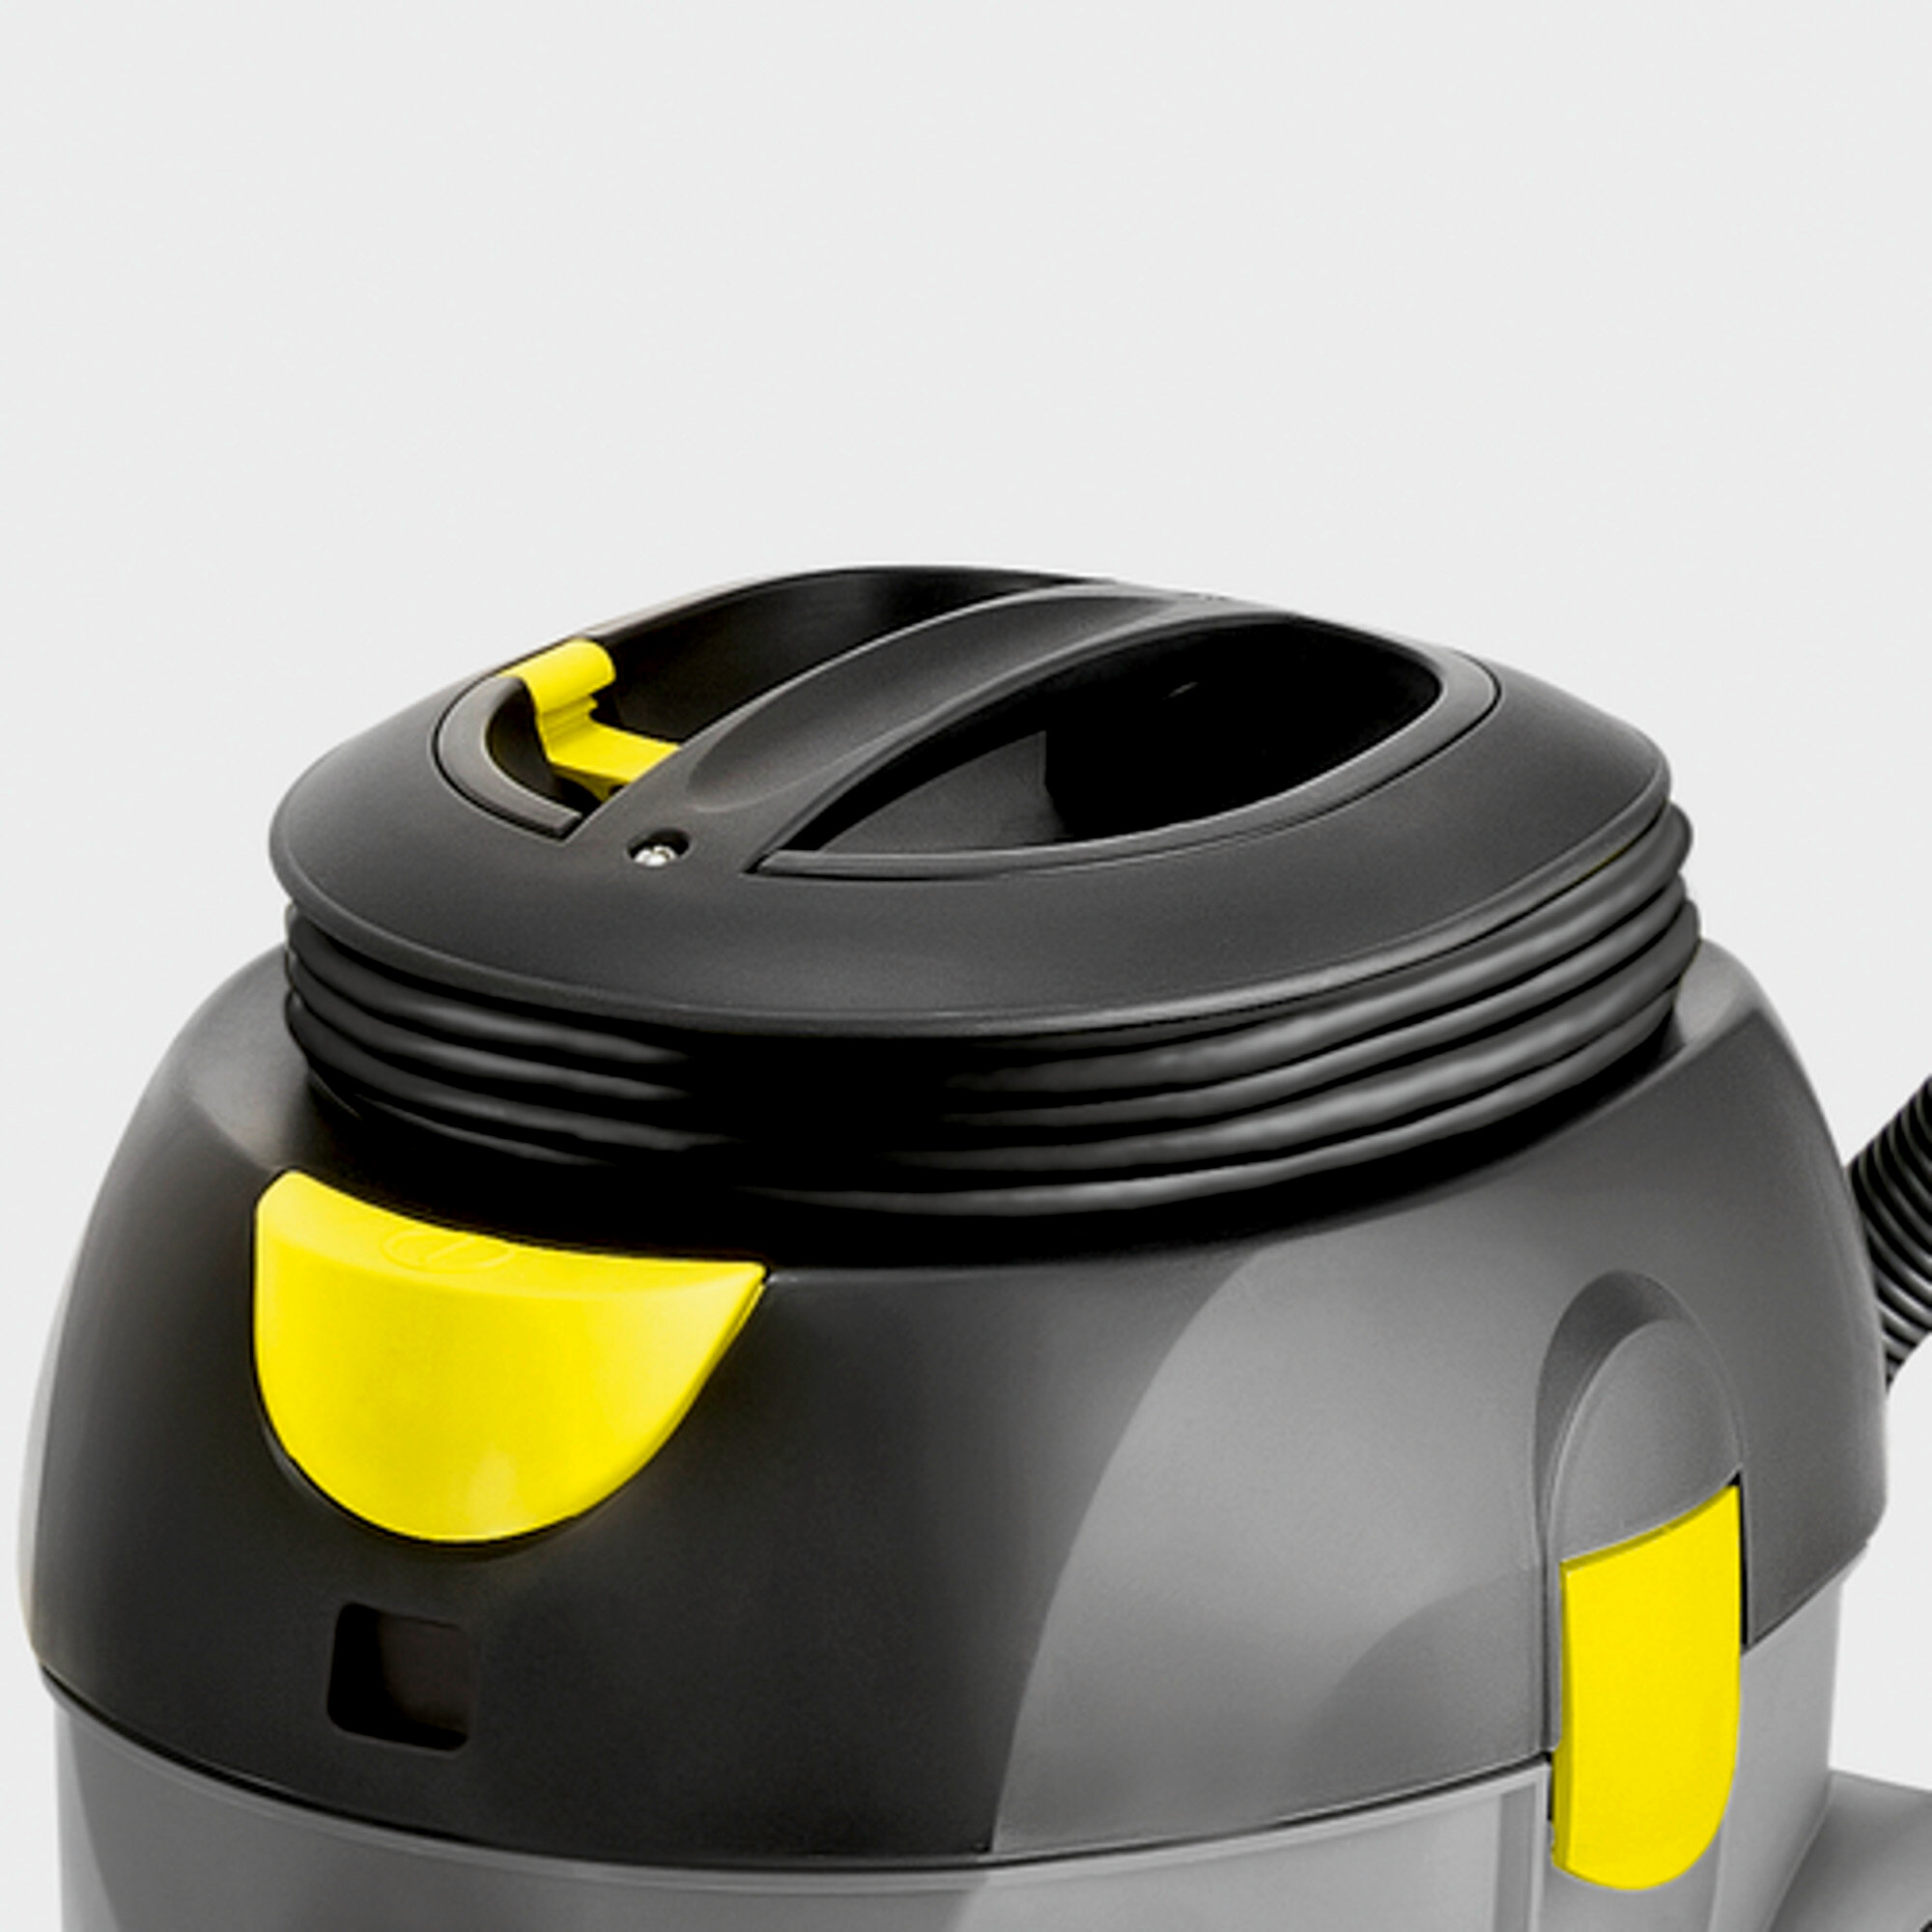 Dry vacuum cleaner T 12/1: On-board cord storage